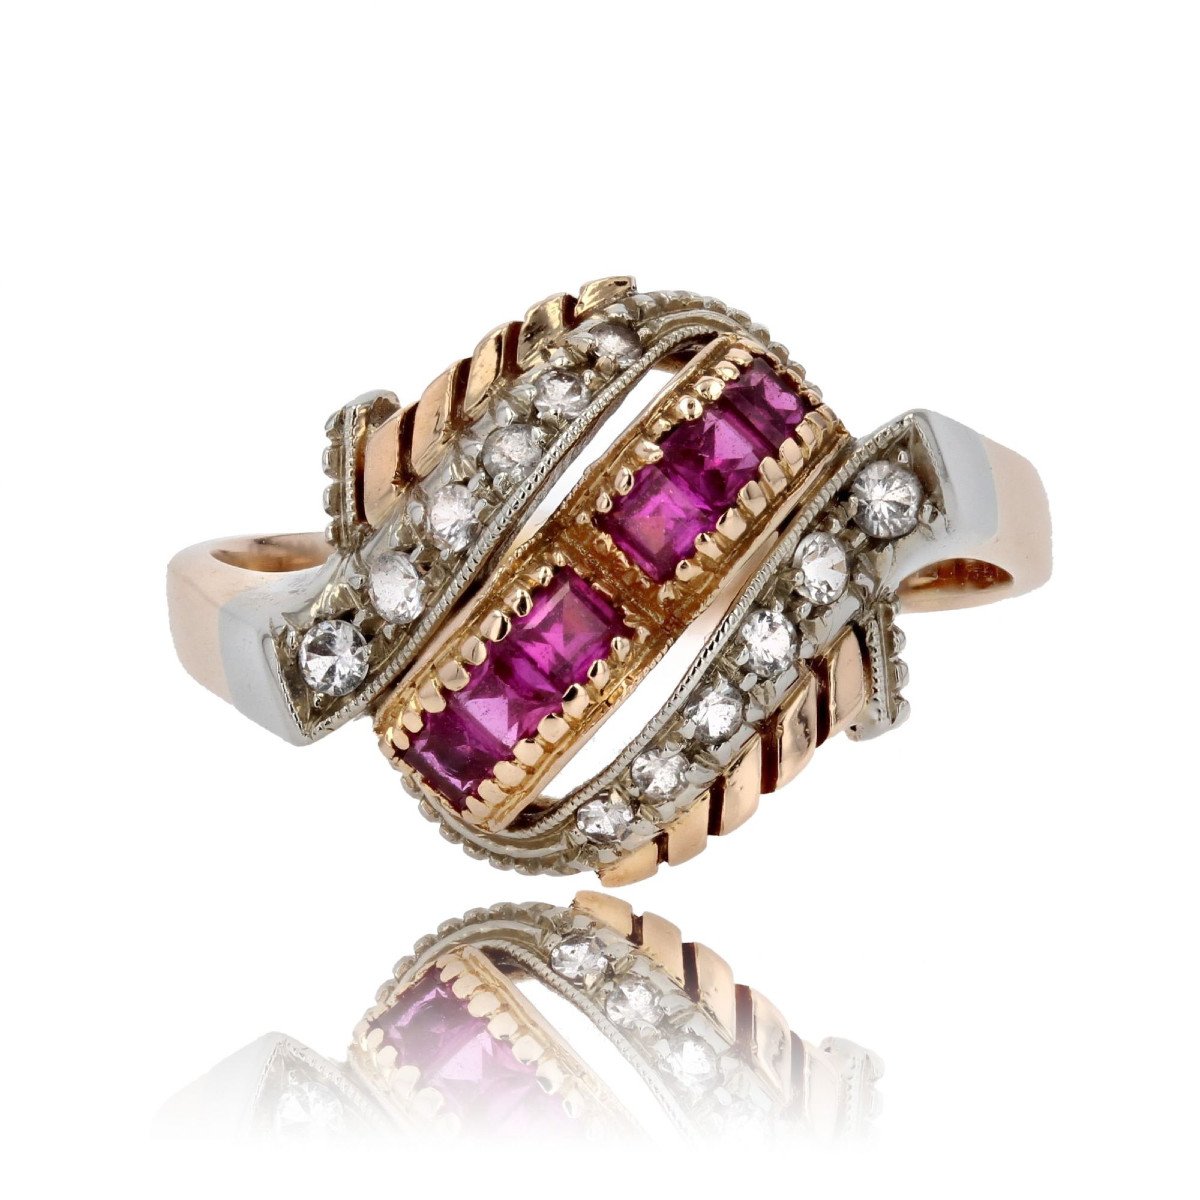 Retro Dome Ring With Synthetic Ruby And White Stones